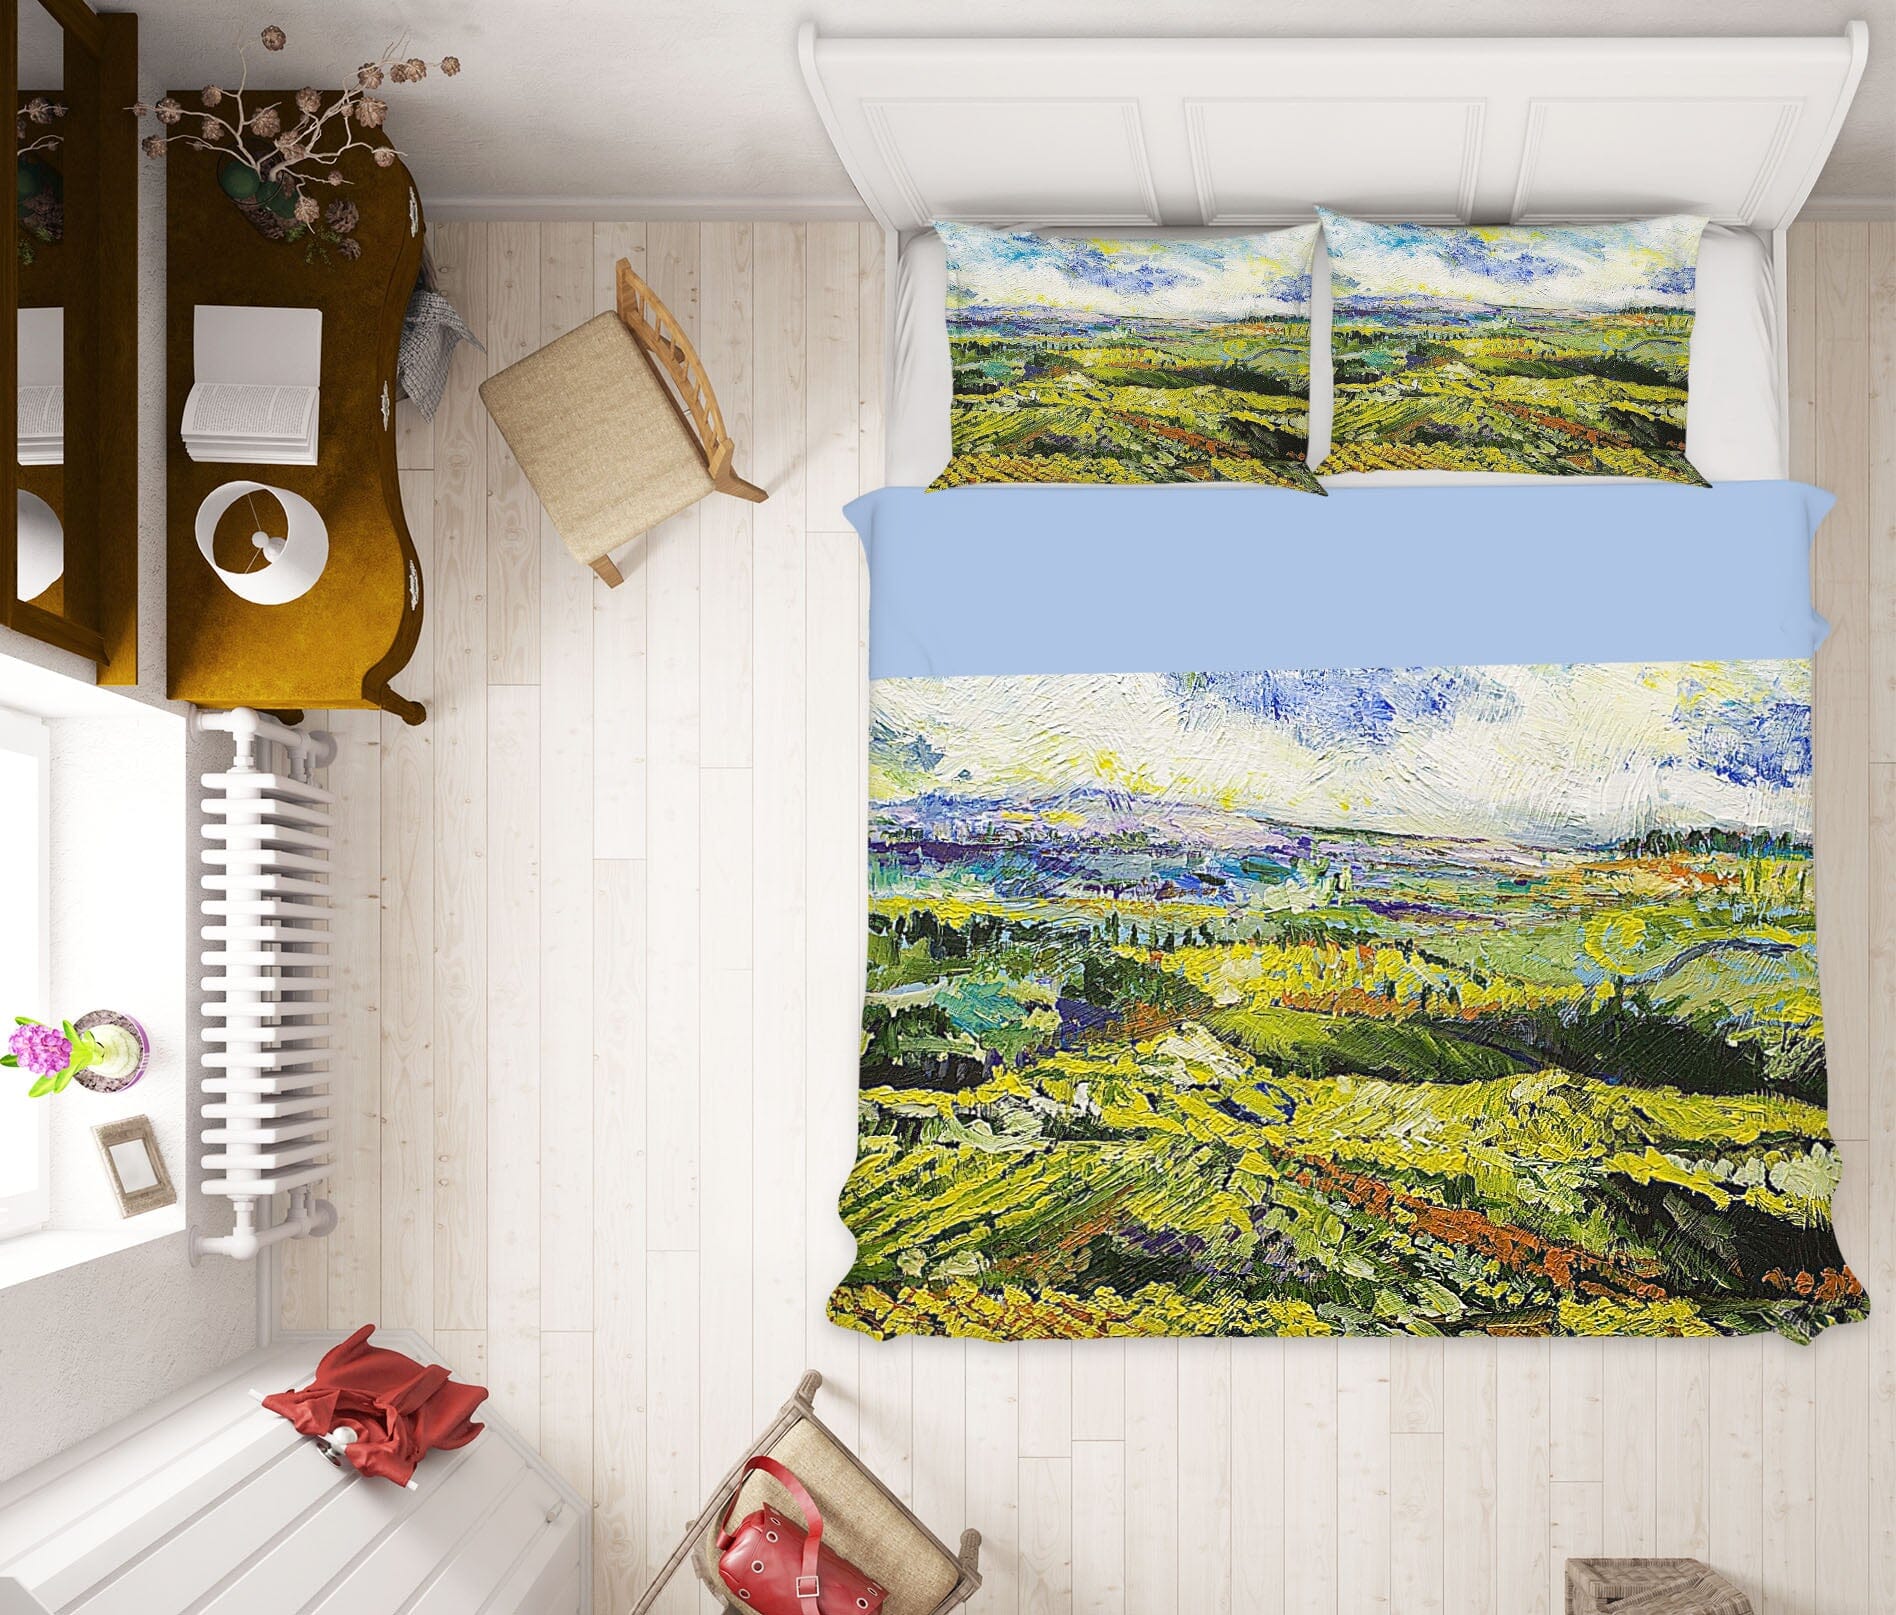 3D Picturesque Countryside 2115 Allan P. Friedlander Bedding Bed Pillowcases Quilt Quiet Covers AJ Creativity Home 